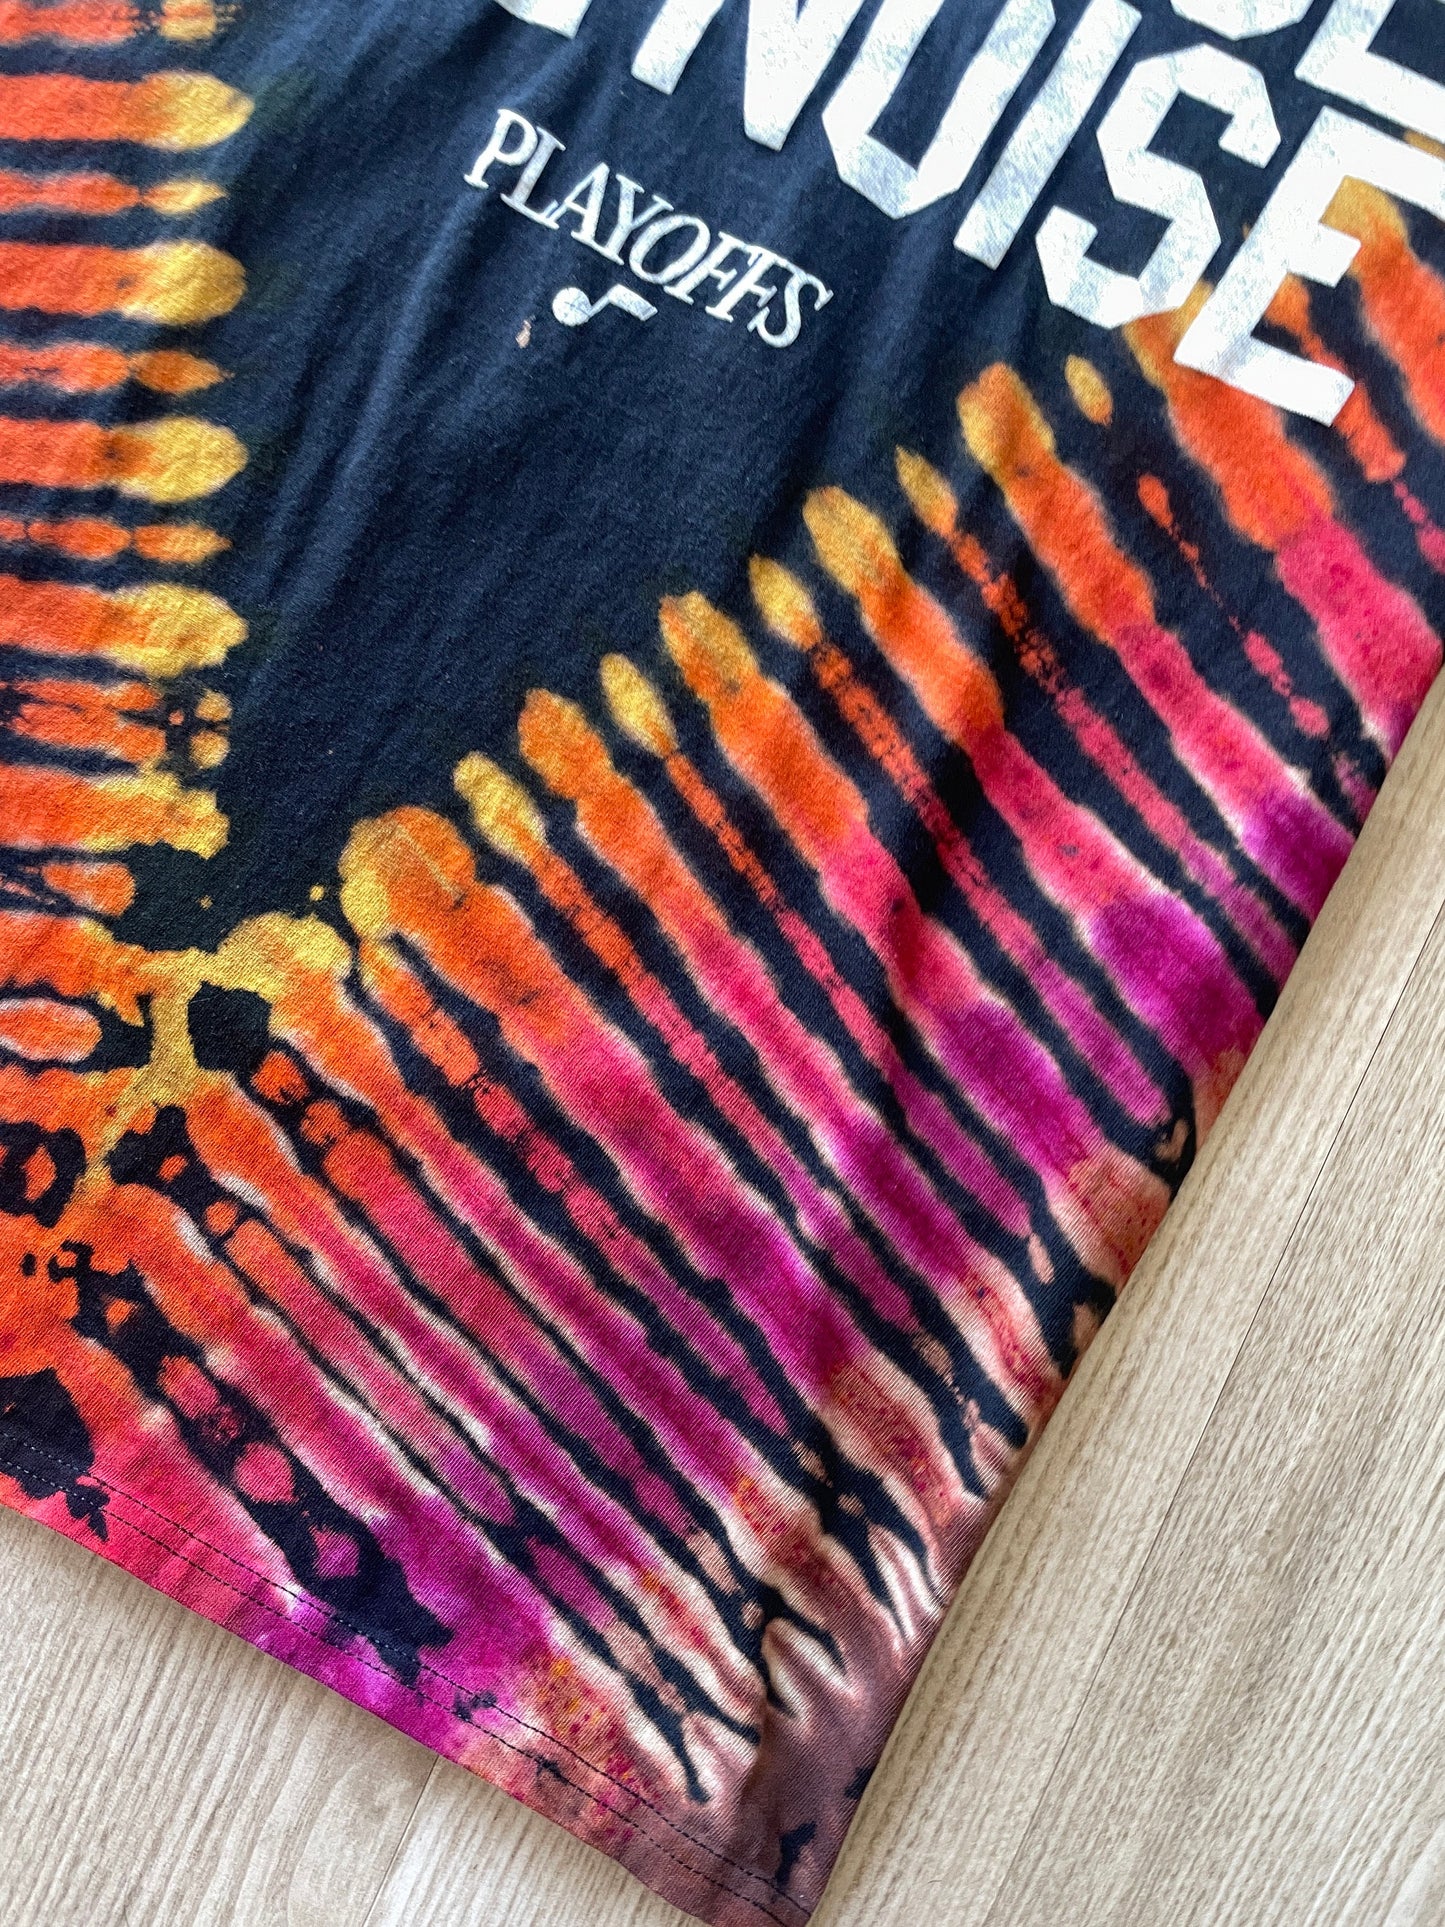 XL Men's Embrace the Noise Utah Jazz Playoffs Handmade Reverse Tie Dye Short Sleeve T-Shirt | One-Of-a-Kind Upcycled Black and Orange Top